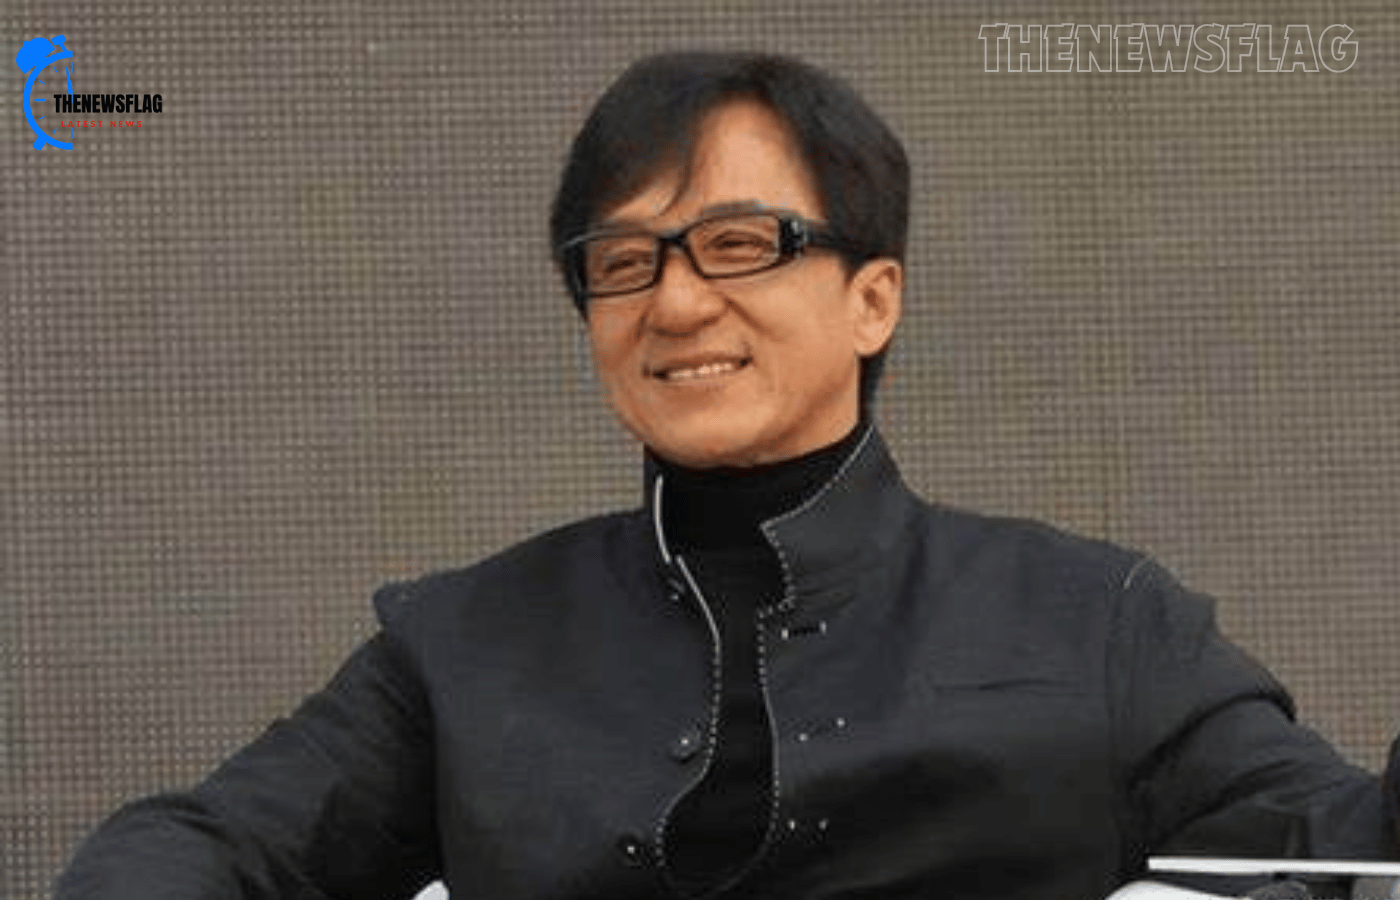 A picture of the 69-year-old Jackie Chan went viral, shocking fans with how ancient he looks.